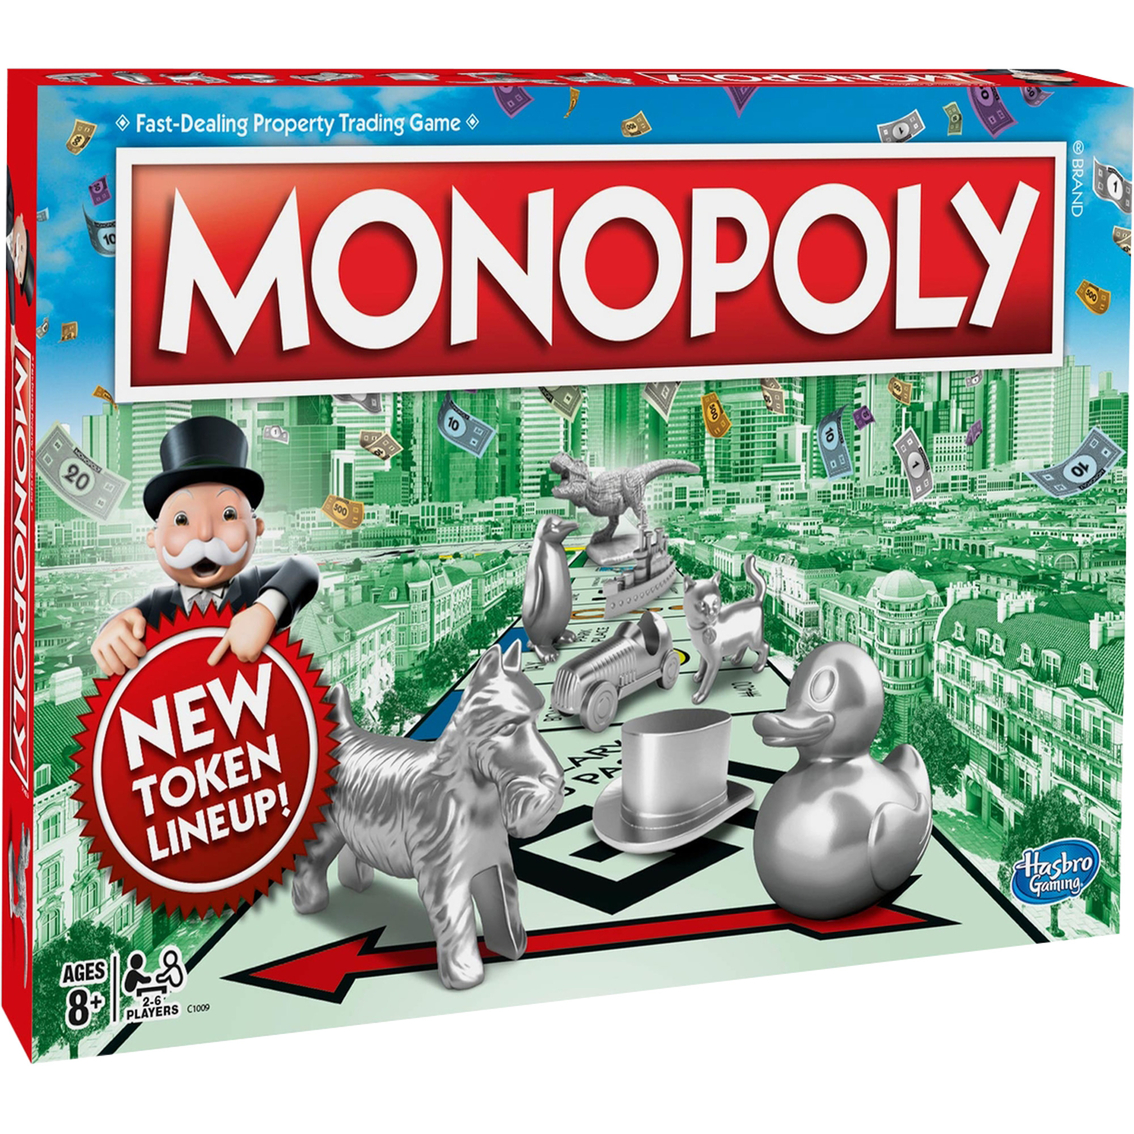 Hasbro Monopoly C1009 Classic Board Game for sale online 